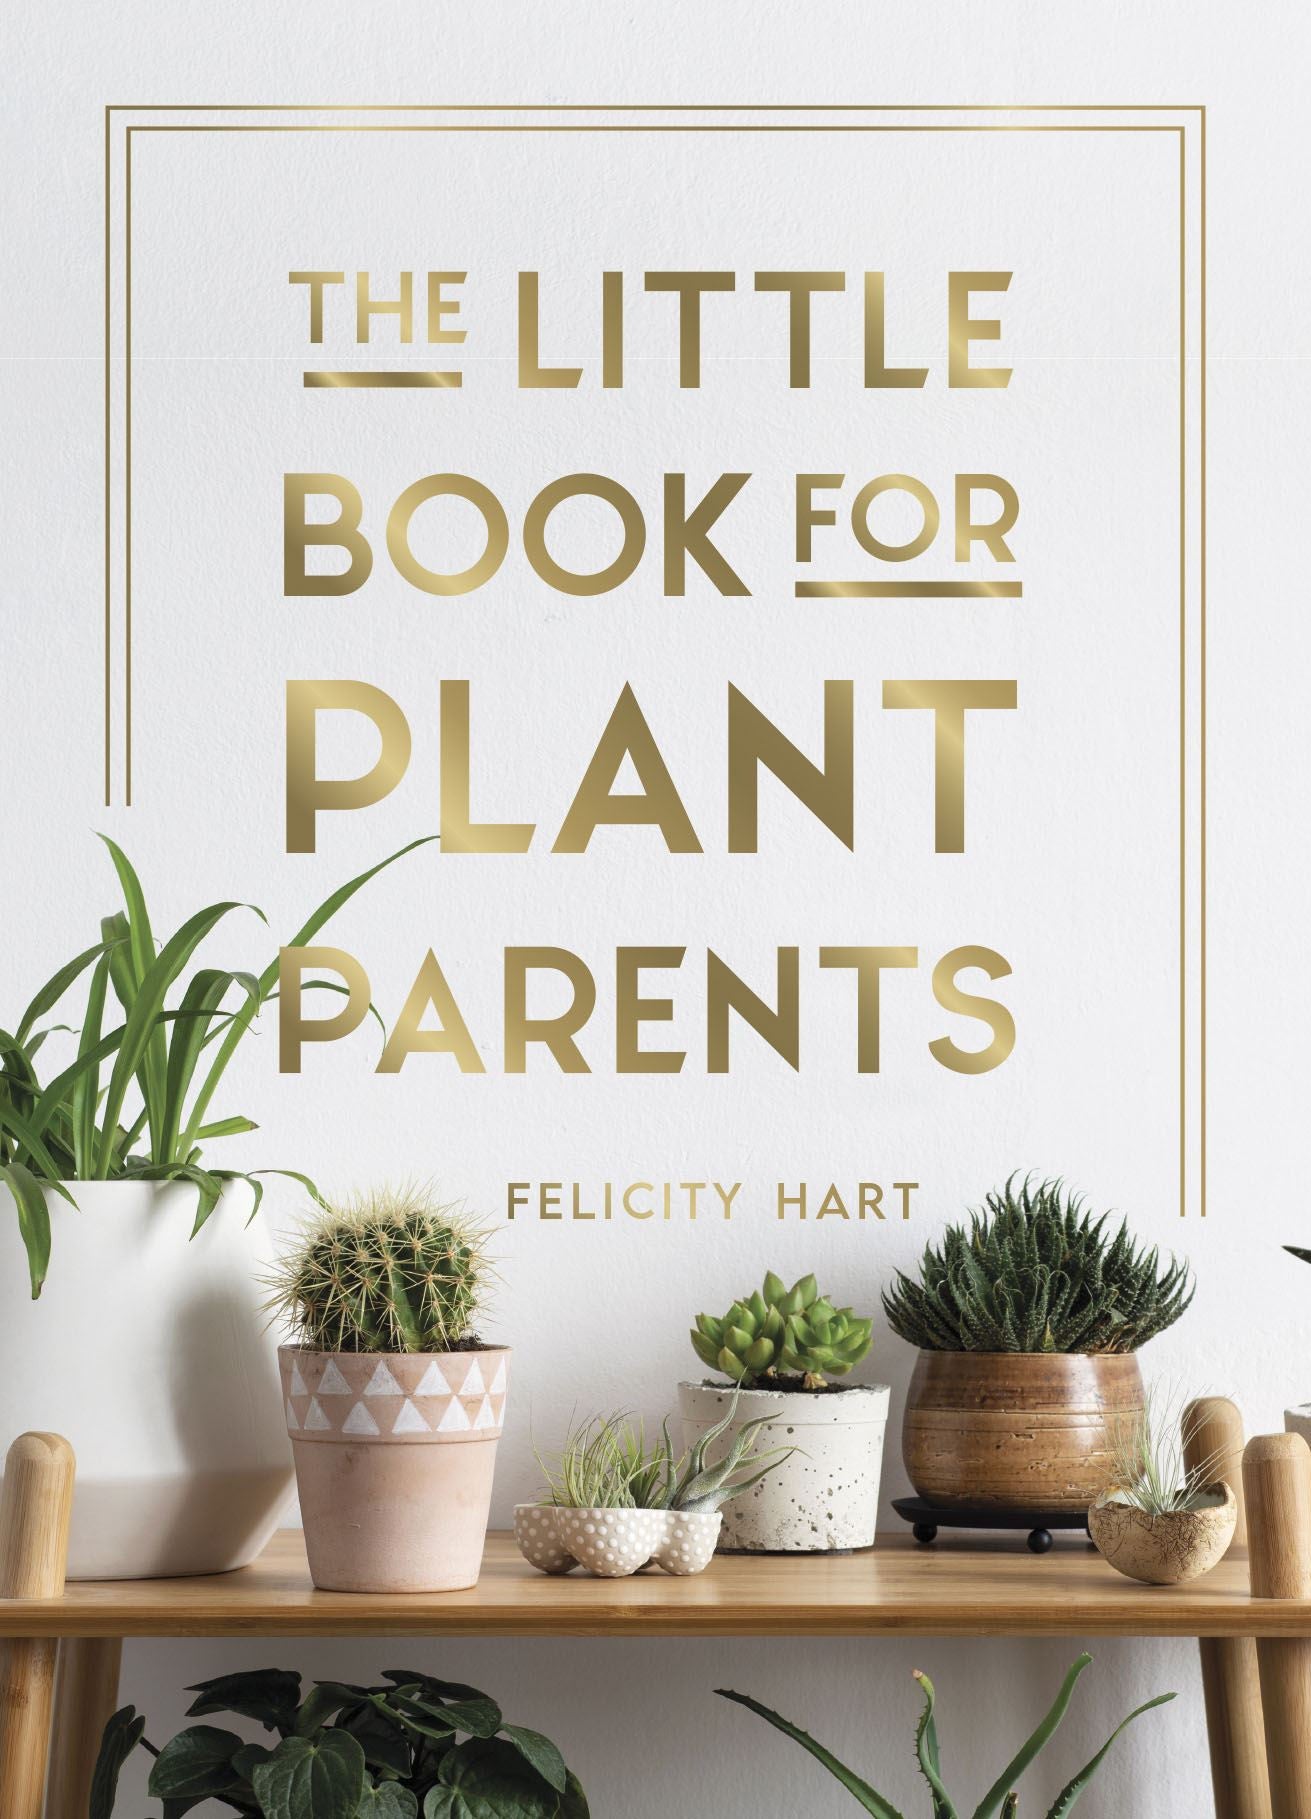 Little book for House parents